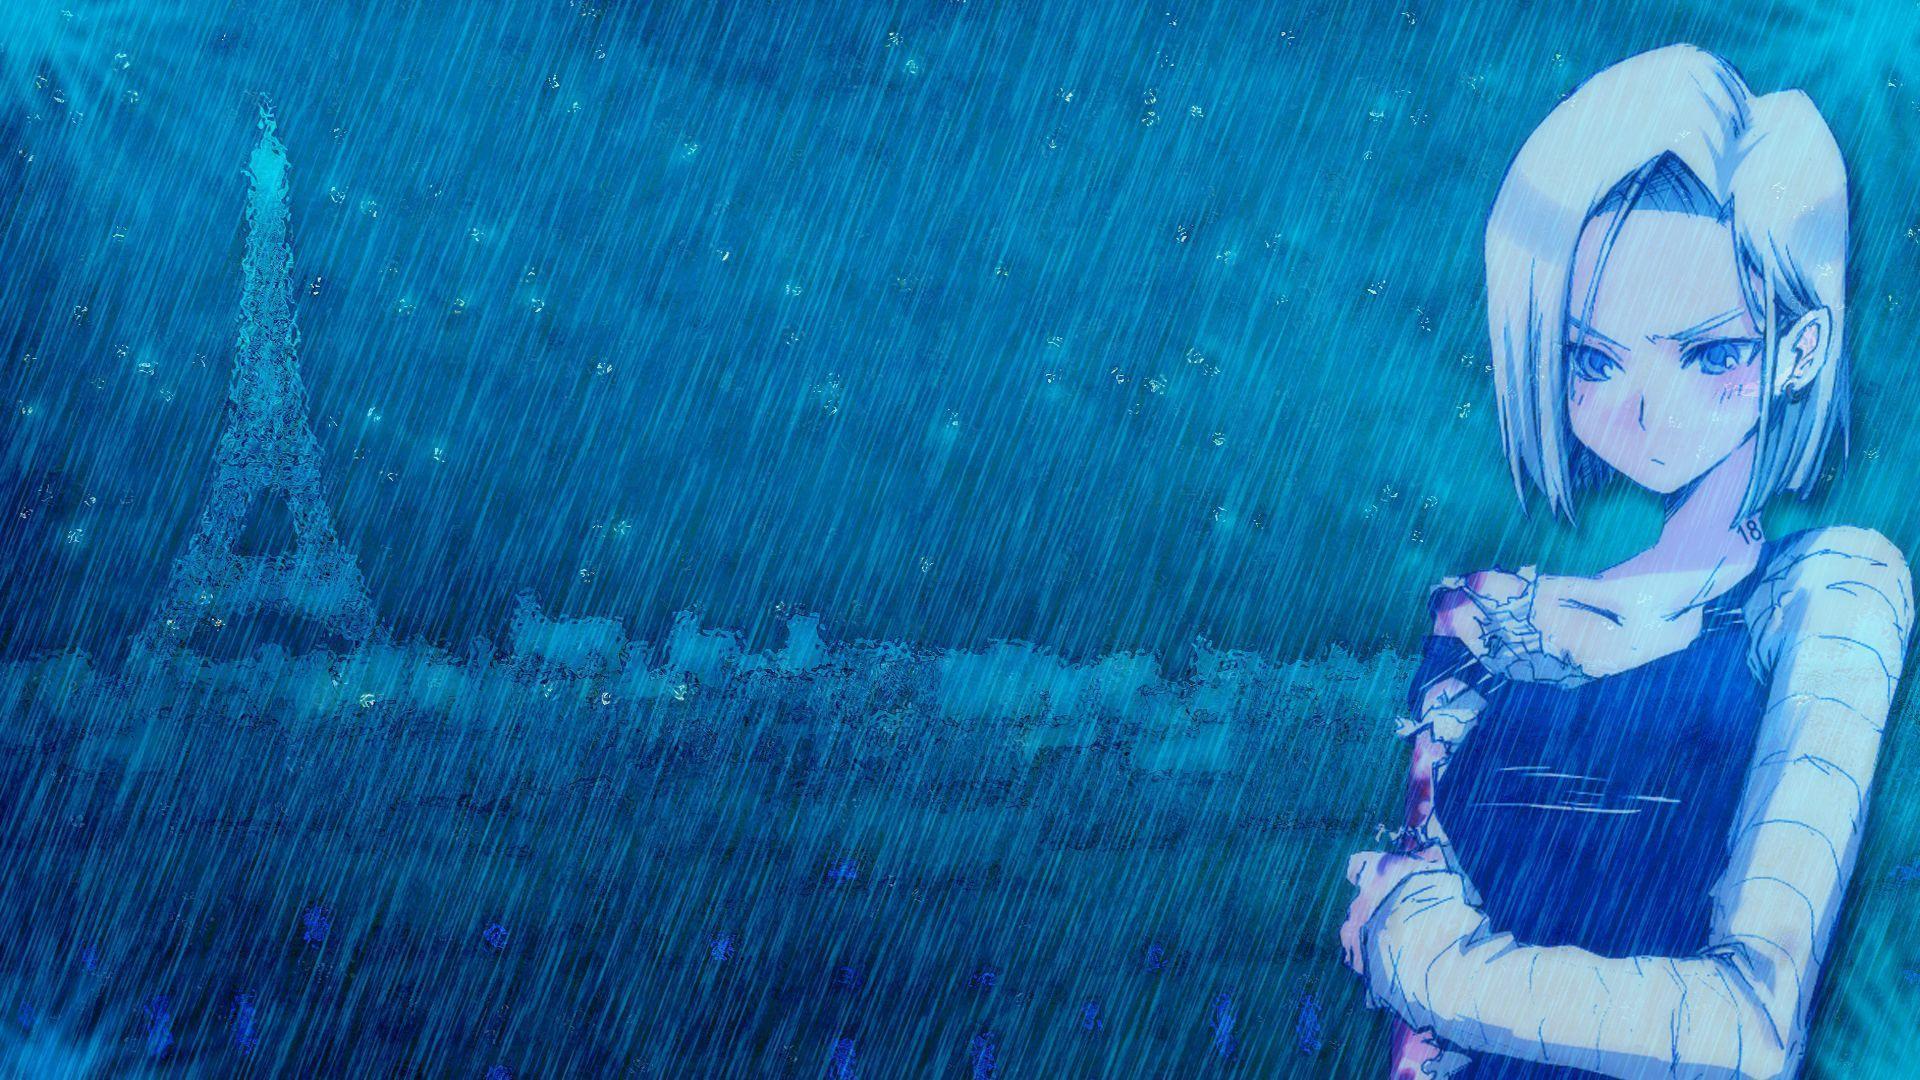 Android 18 rain wallpapers by MikeDarko